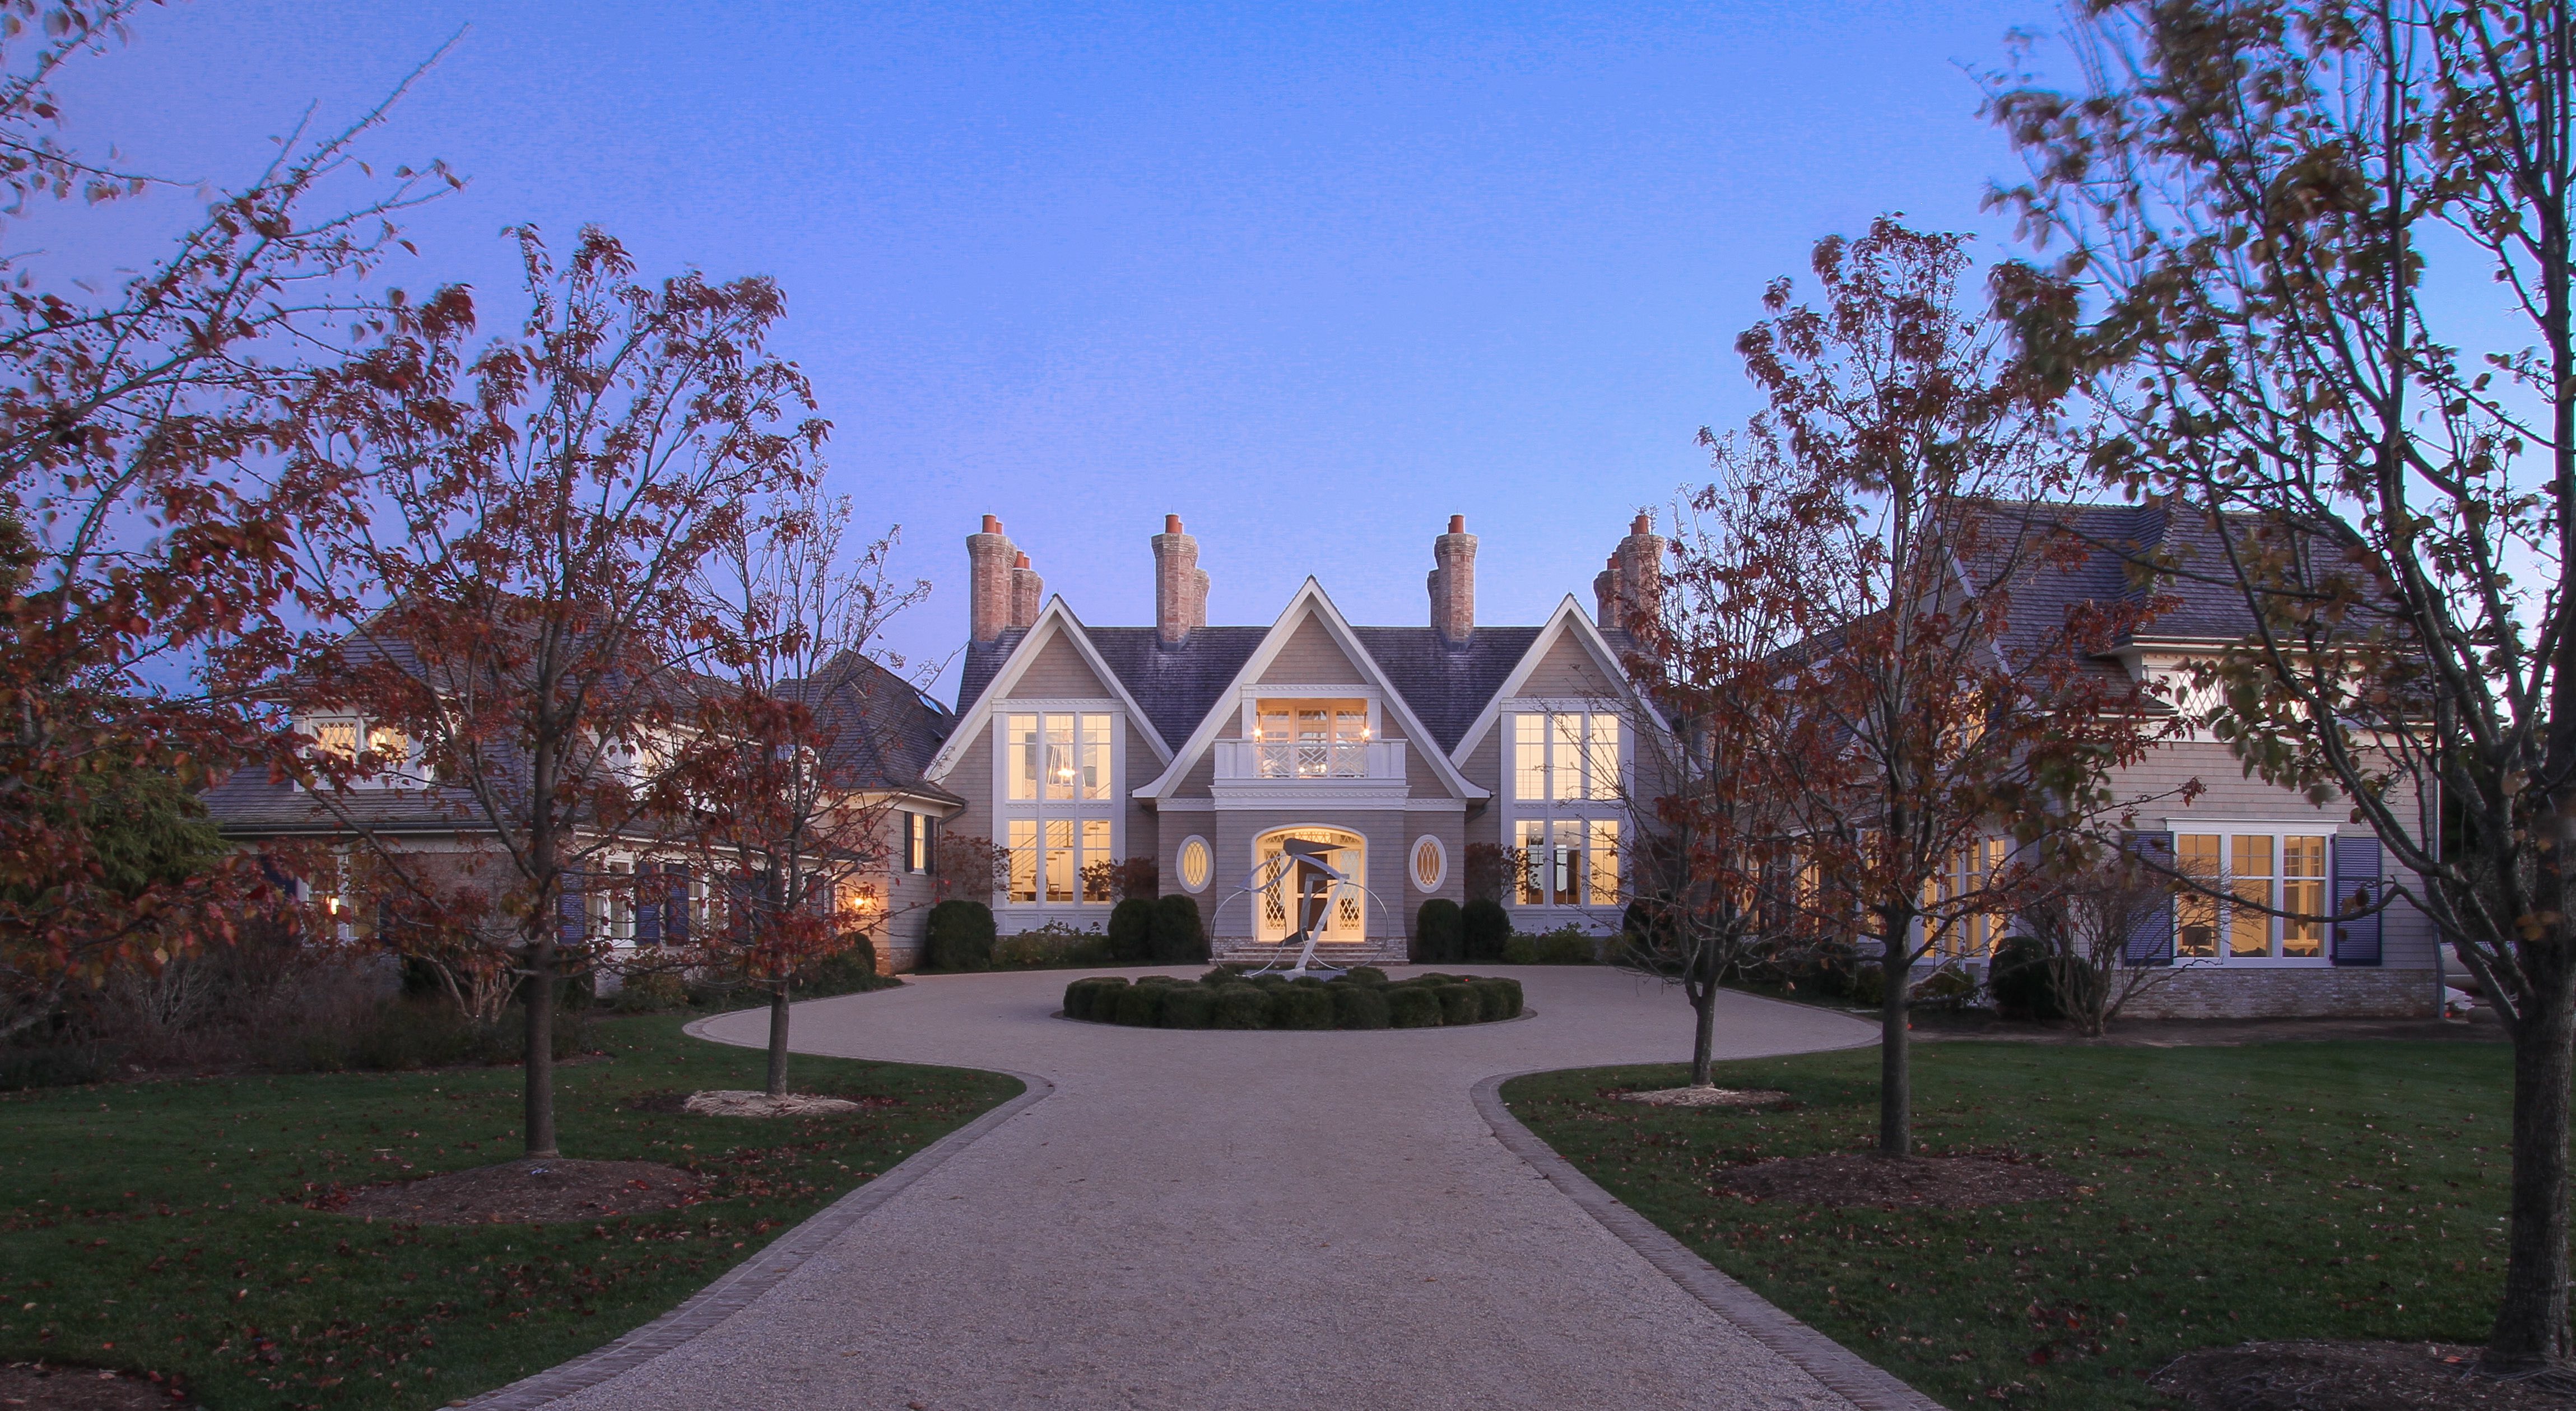 Traditional meets modern in the Hamptons designed by Andrew Pollock Architect constructed by Ben Krupinski Builder in East Hampton, NY Photo: Jeff Heatley